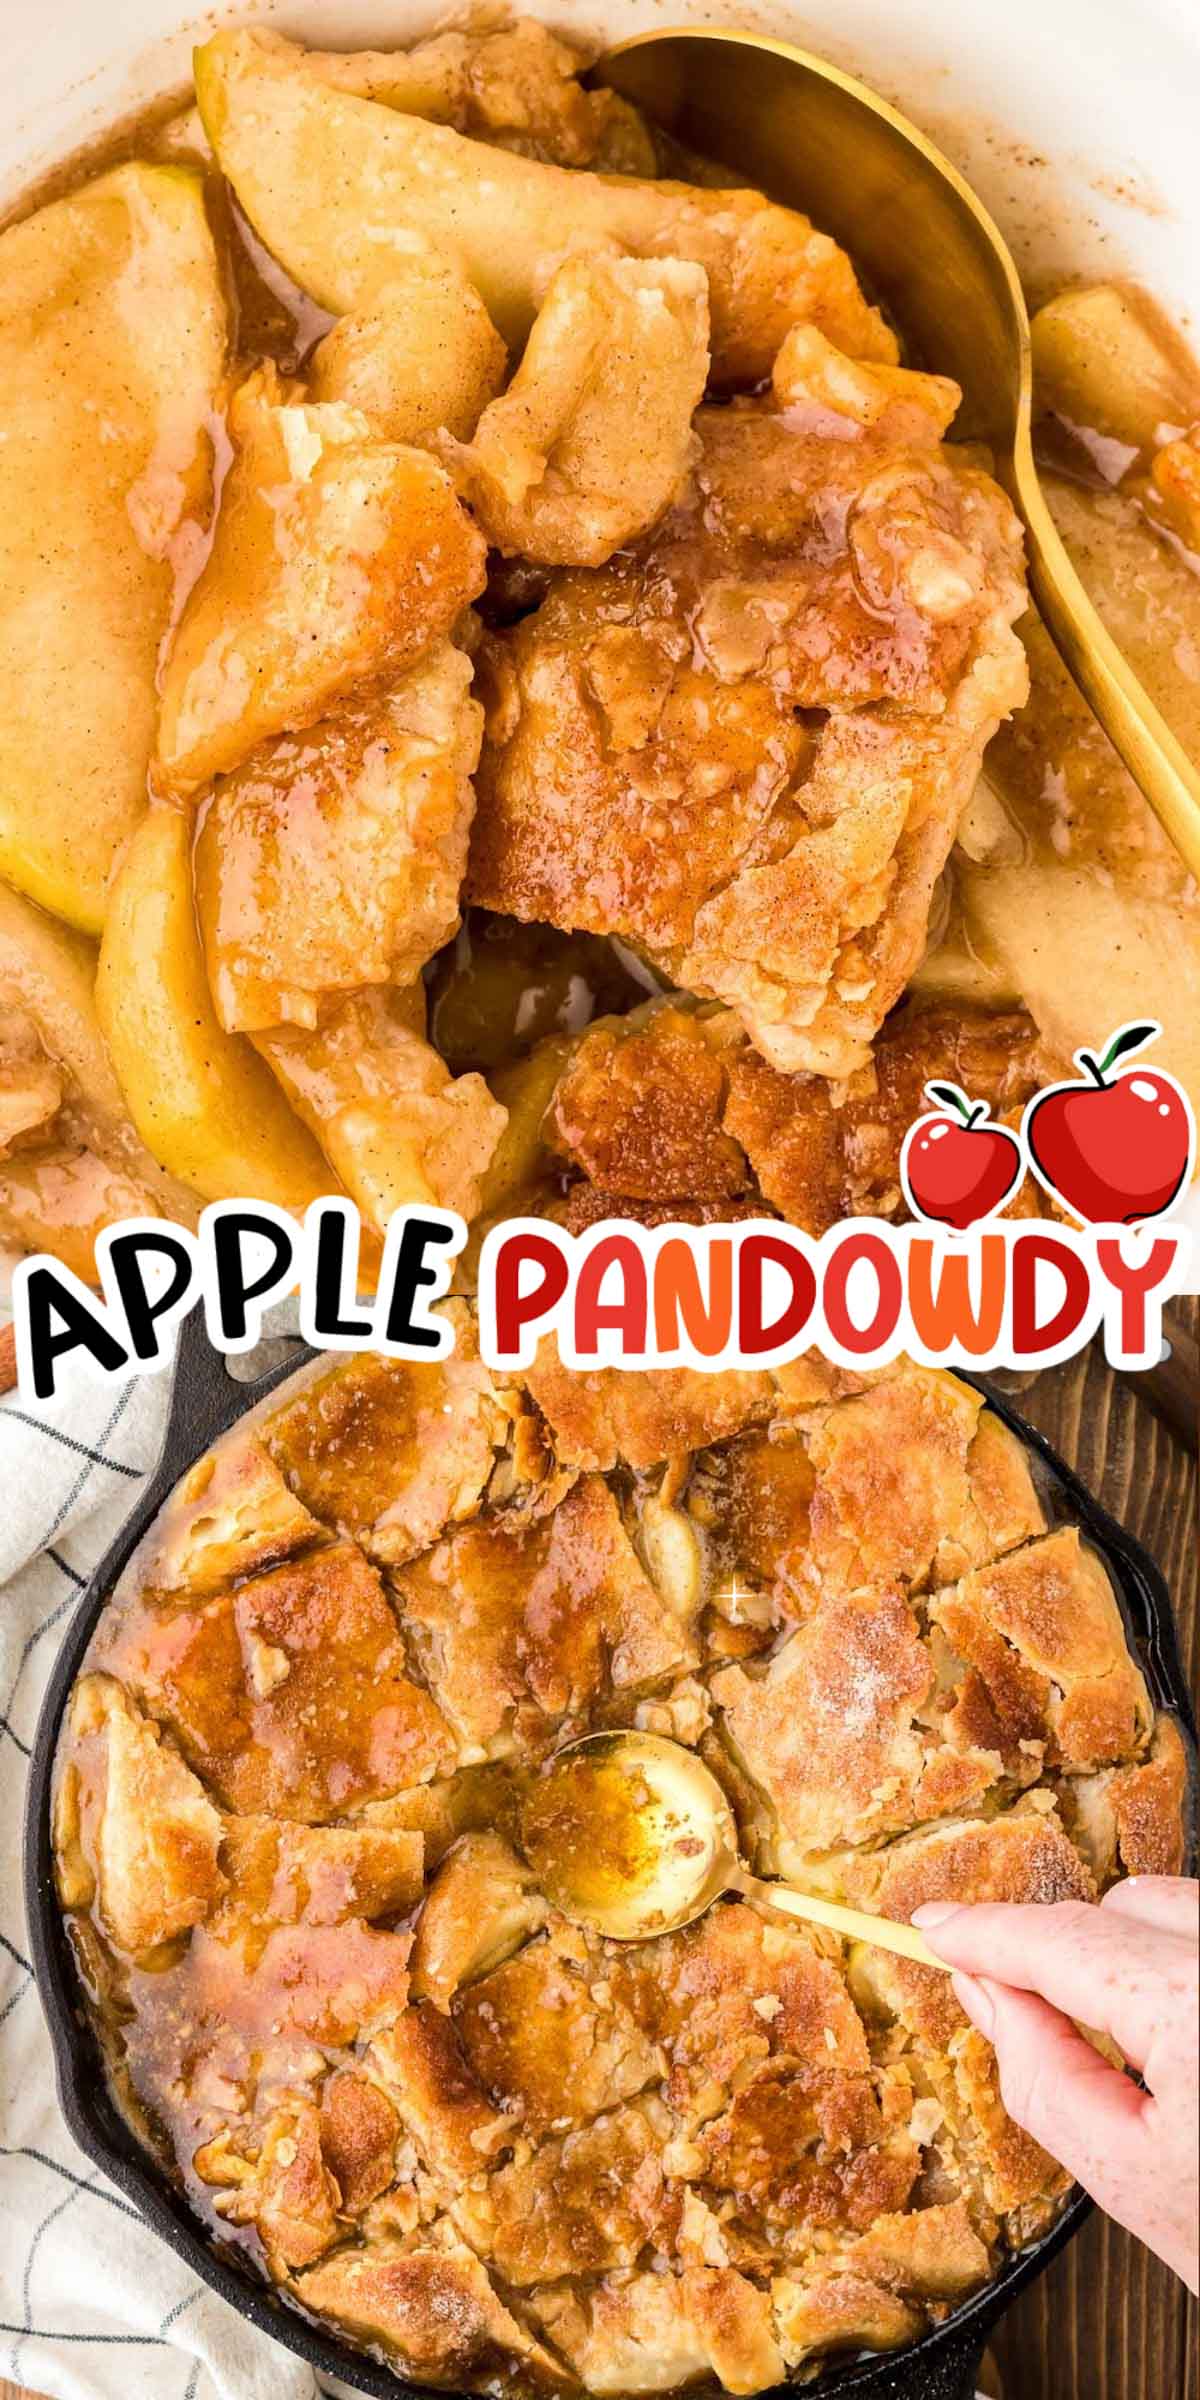 This Apple Pandowdy Recipe is loaded with sweetly spiced tender apples and covered in a pie crust that's been sprinkled with cinnamon sugar! It takes only 30 minutes to prep this baked cozy apple dessert! via @sugarandsoulco